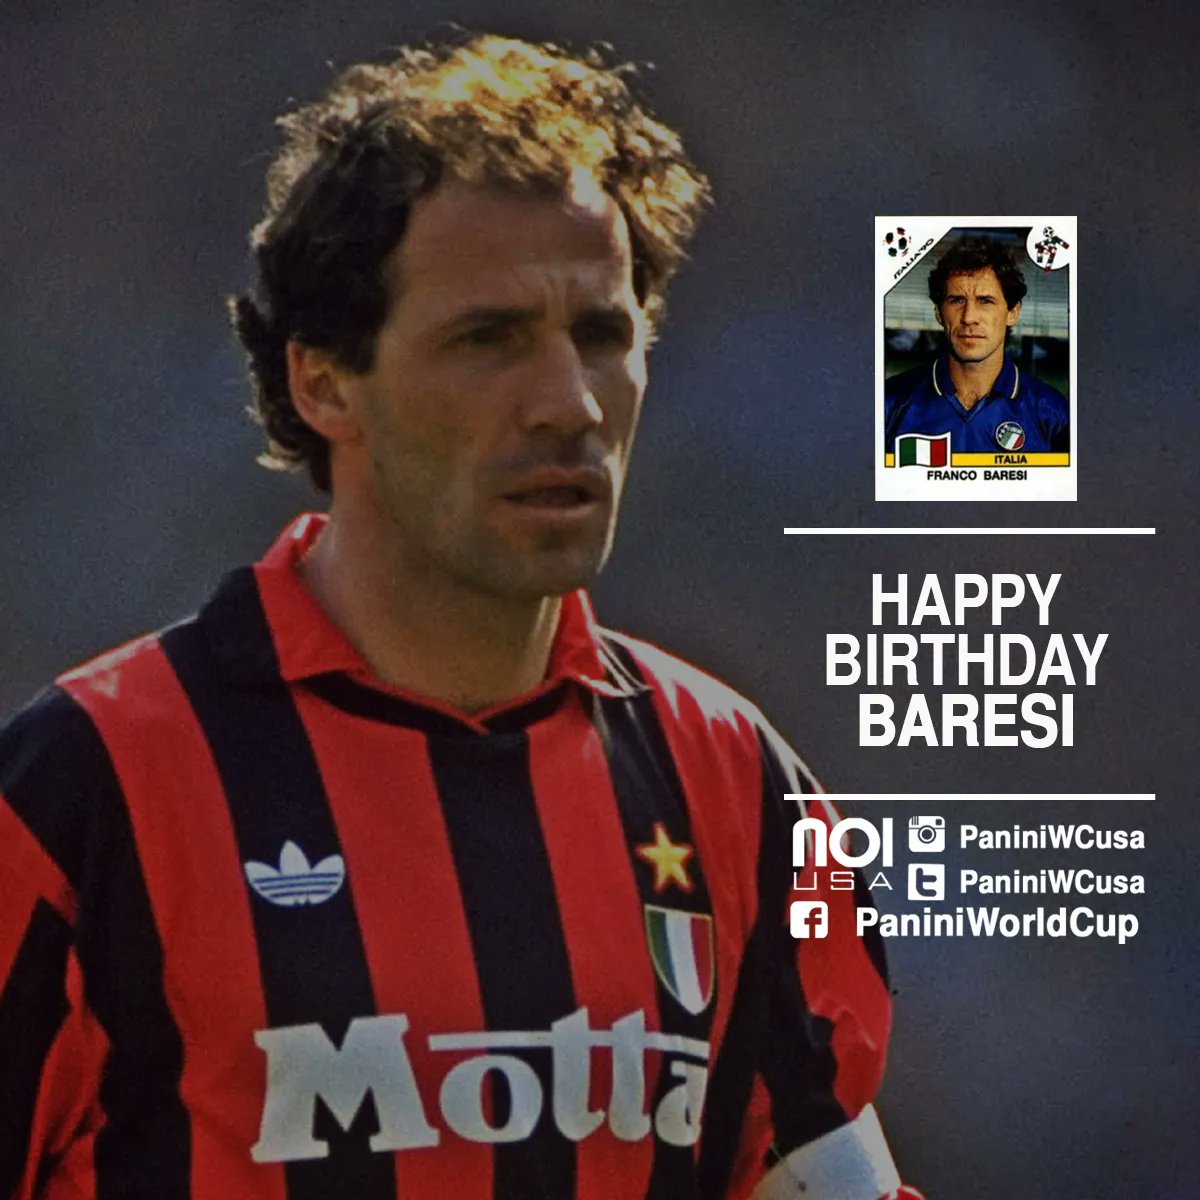 Happy birthday to one of the best defenders we\ve ever seen!!! Franco Baresi!!! 